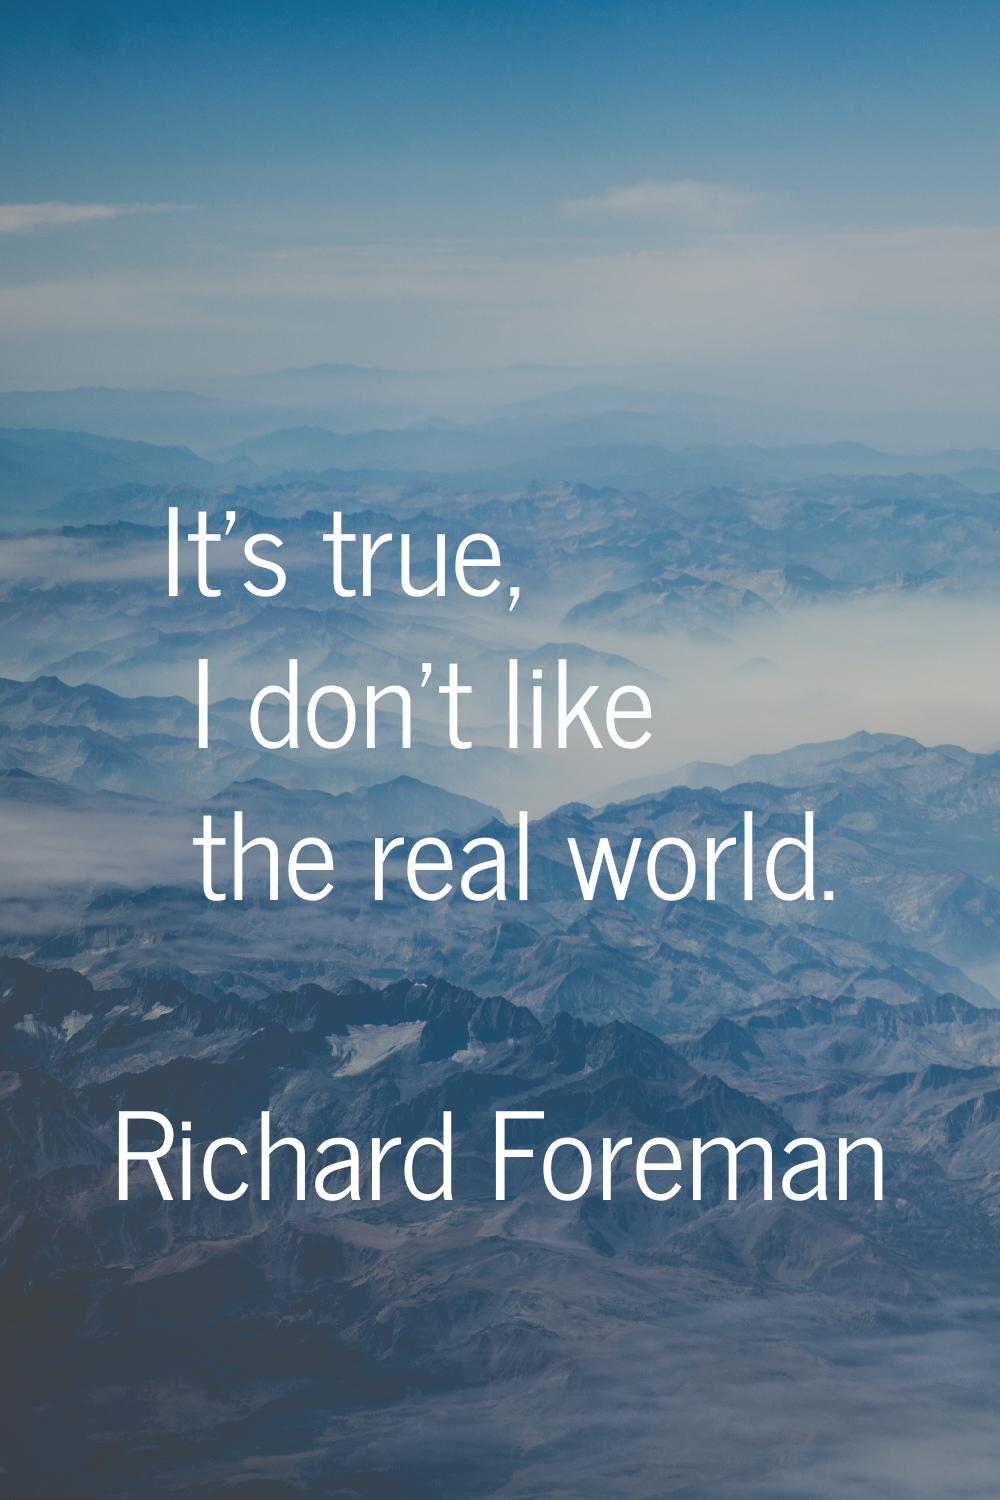 It's true, I don't like the real world.